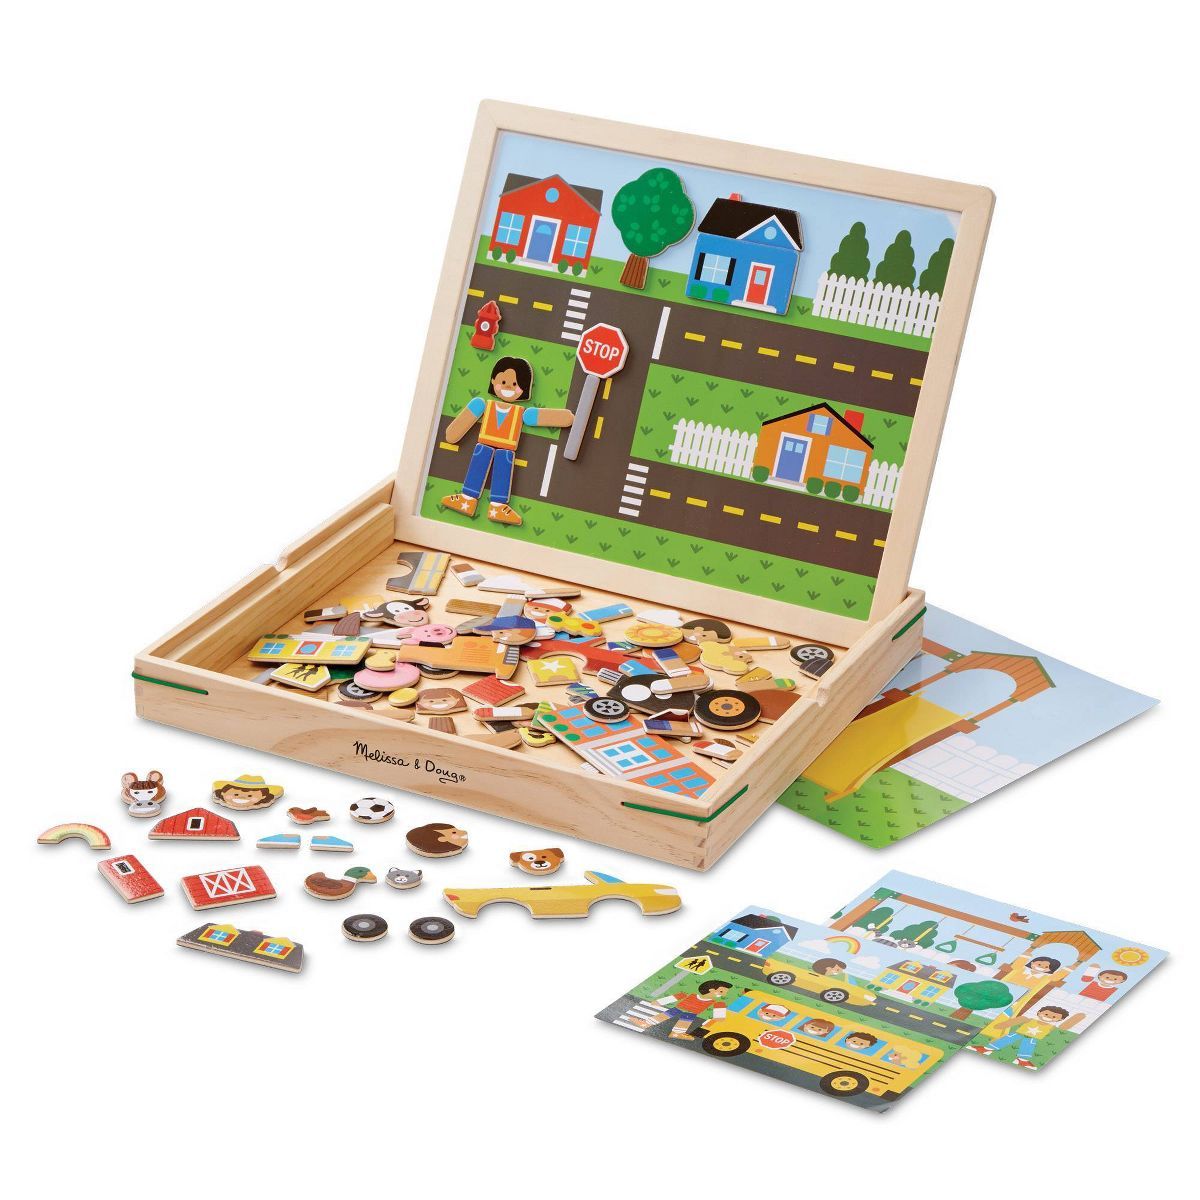 Melissa & Doug Magnetic Matching Picture Game 119pc | Target